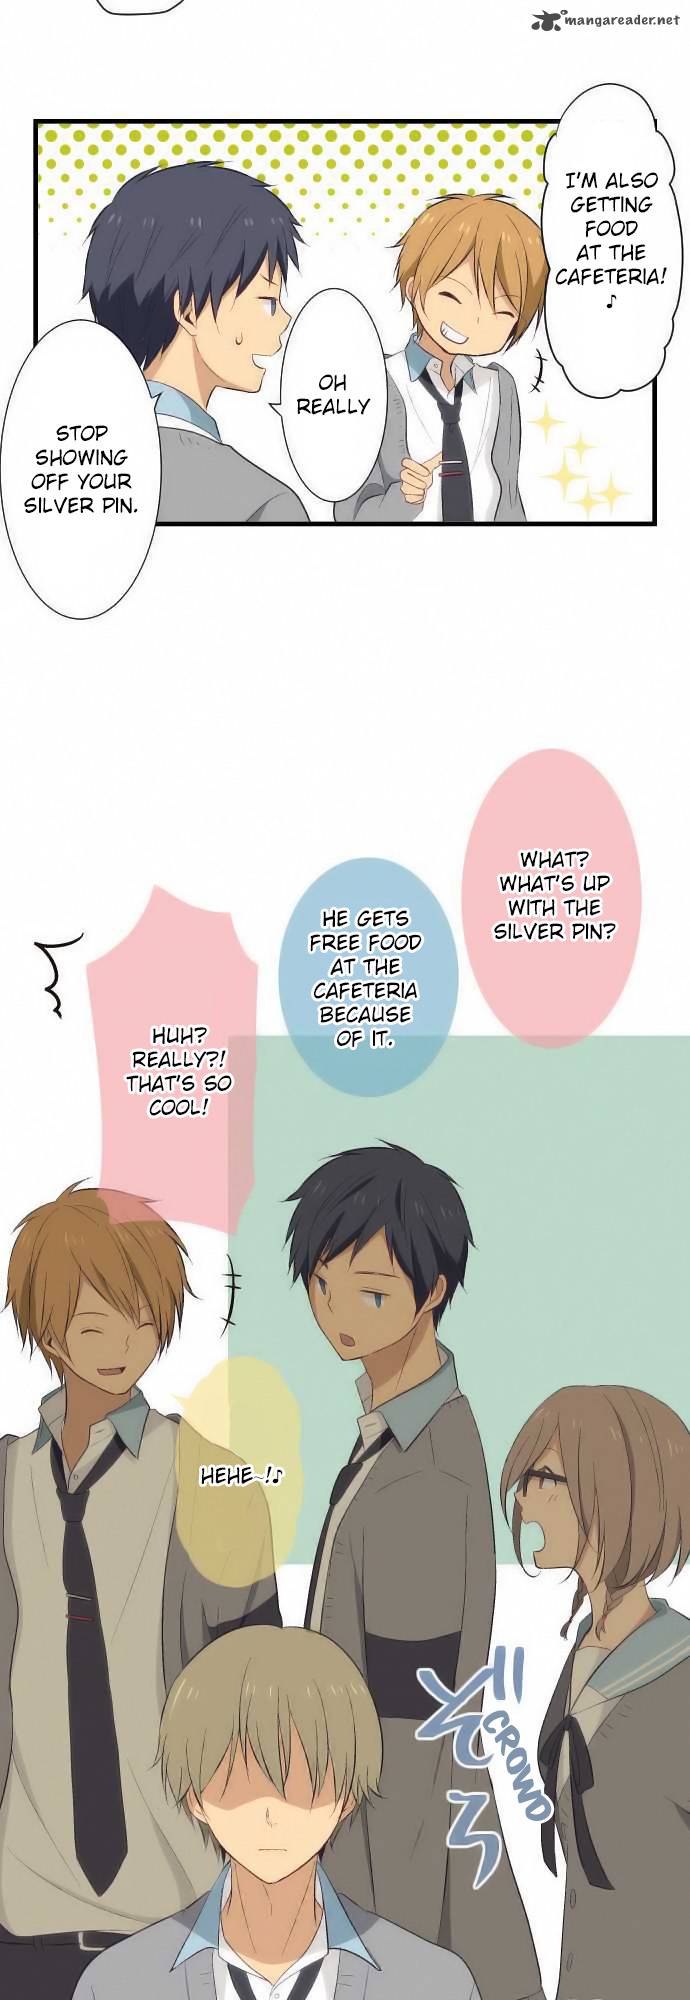 Relife 22 7